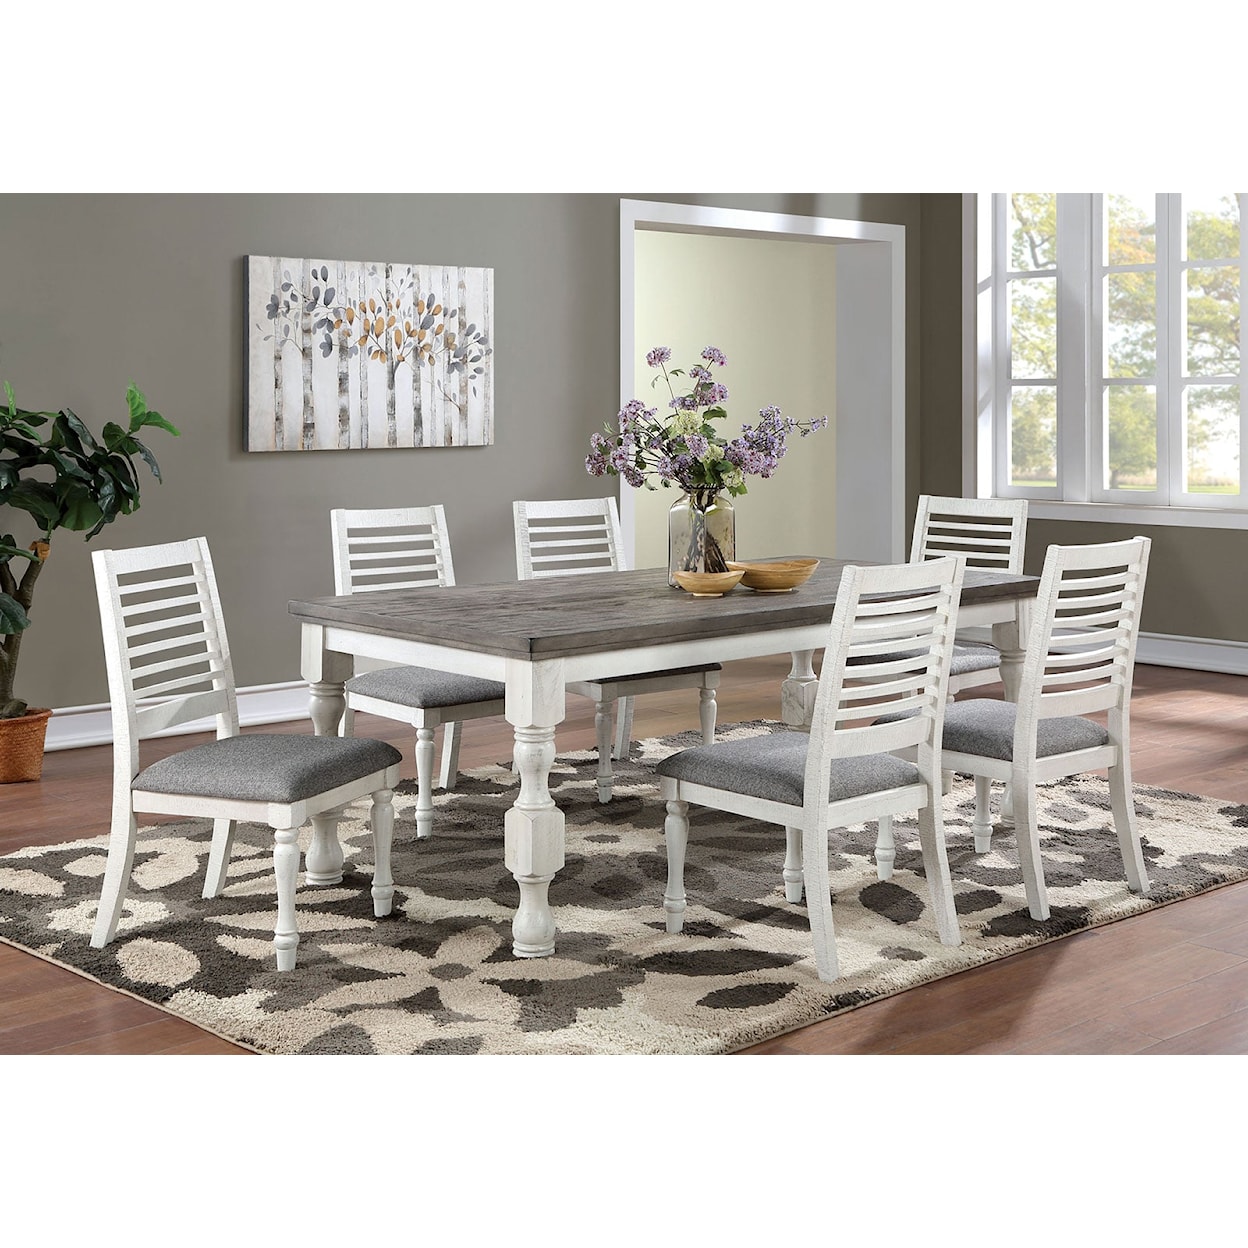 Furniture of America Calabria 7 Pc. Dining Table Set